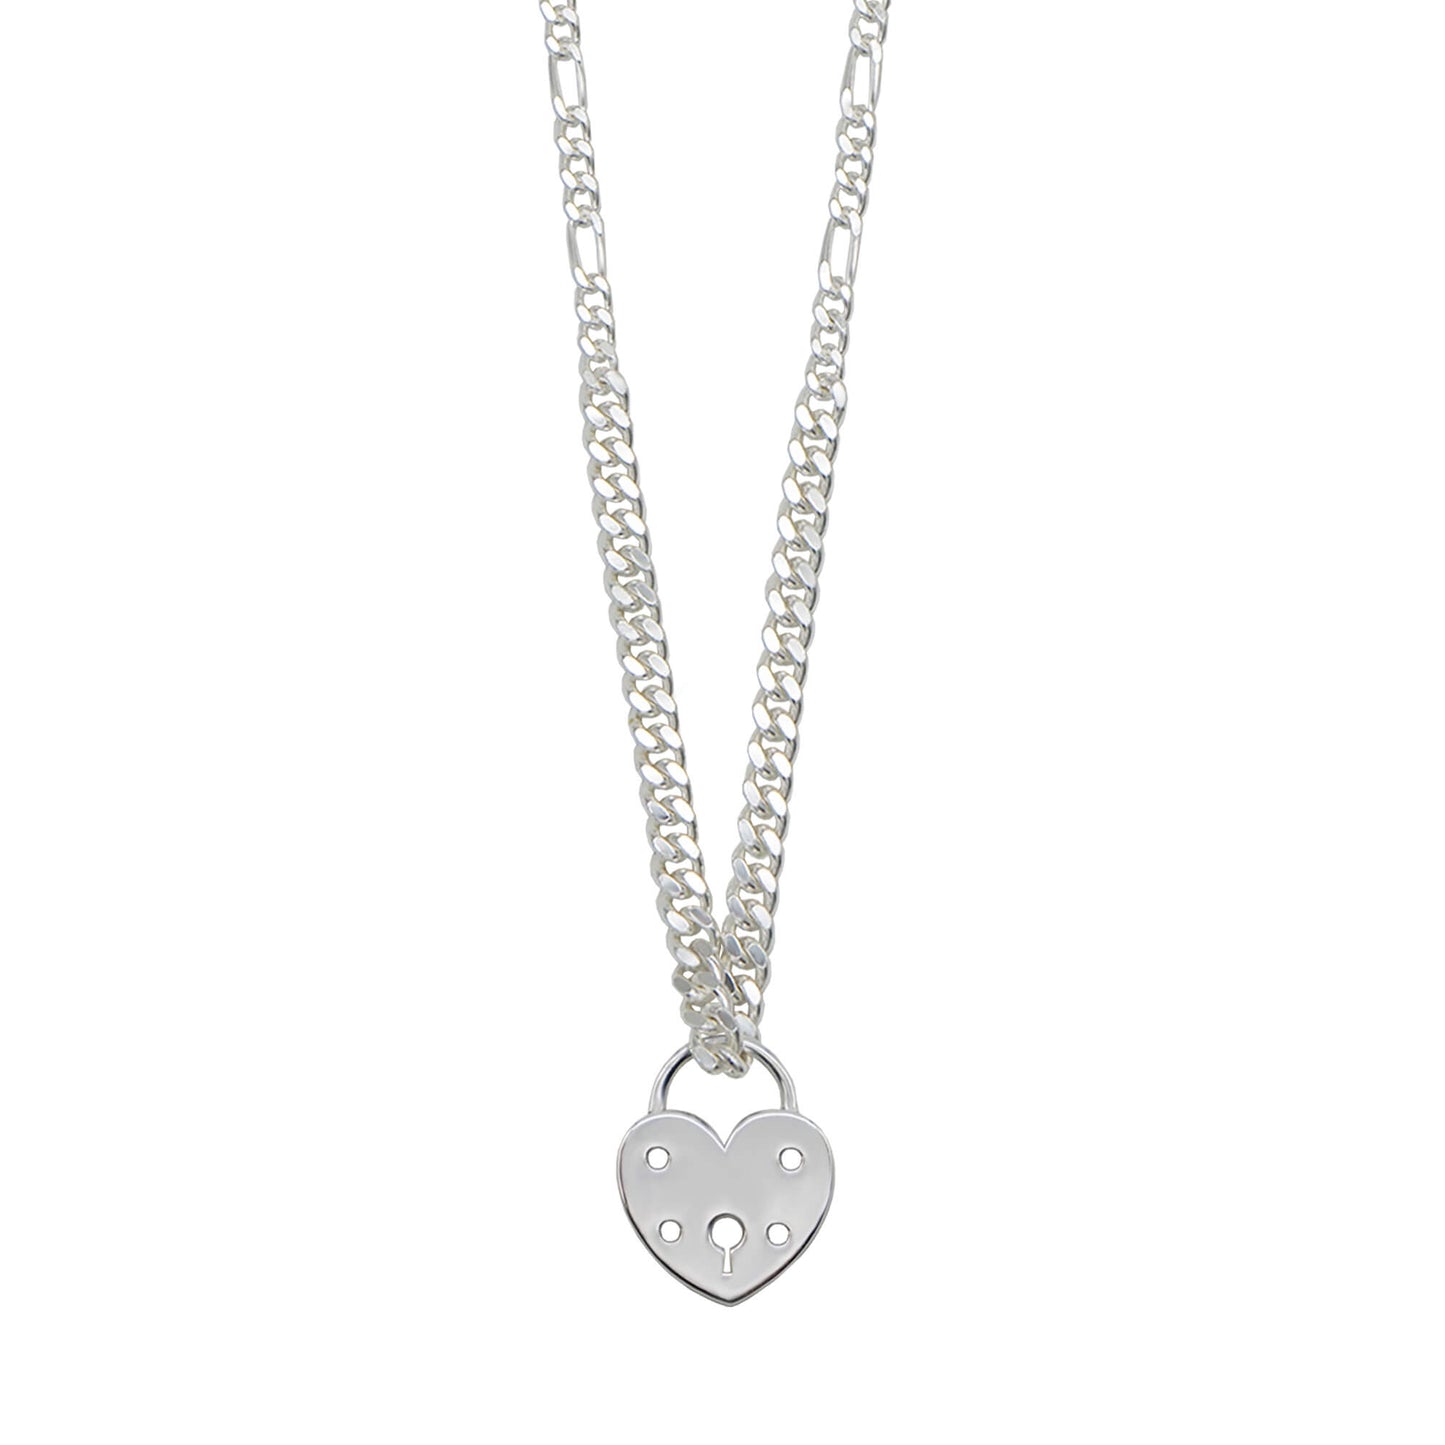 Sterling silver curb chain necklace with Heart padlock charm threaded through the chain.